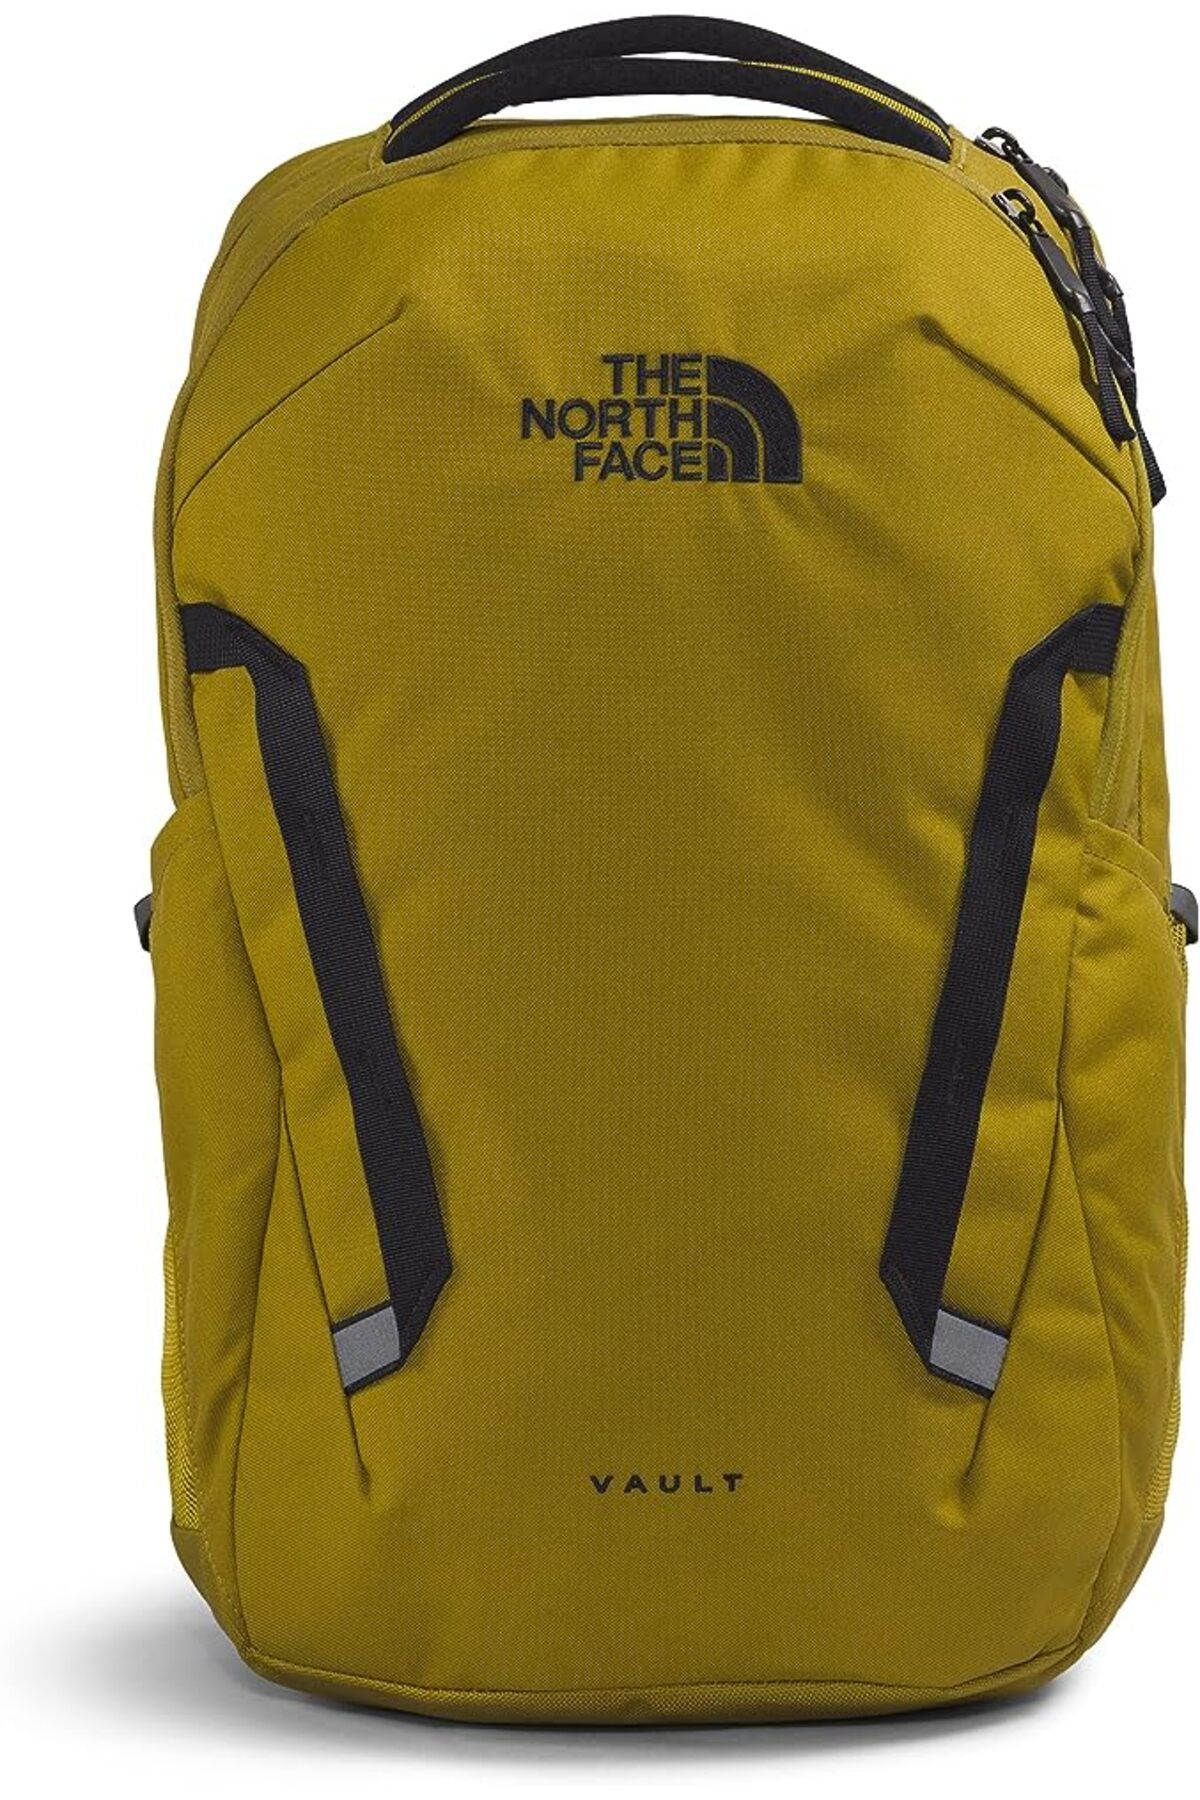 The North Face VAULT